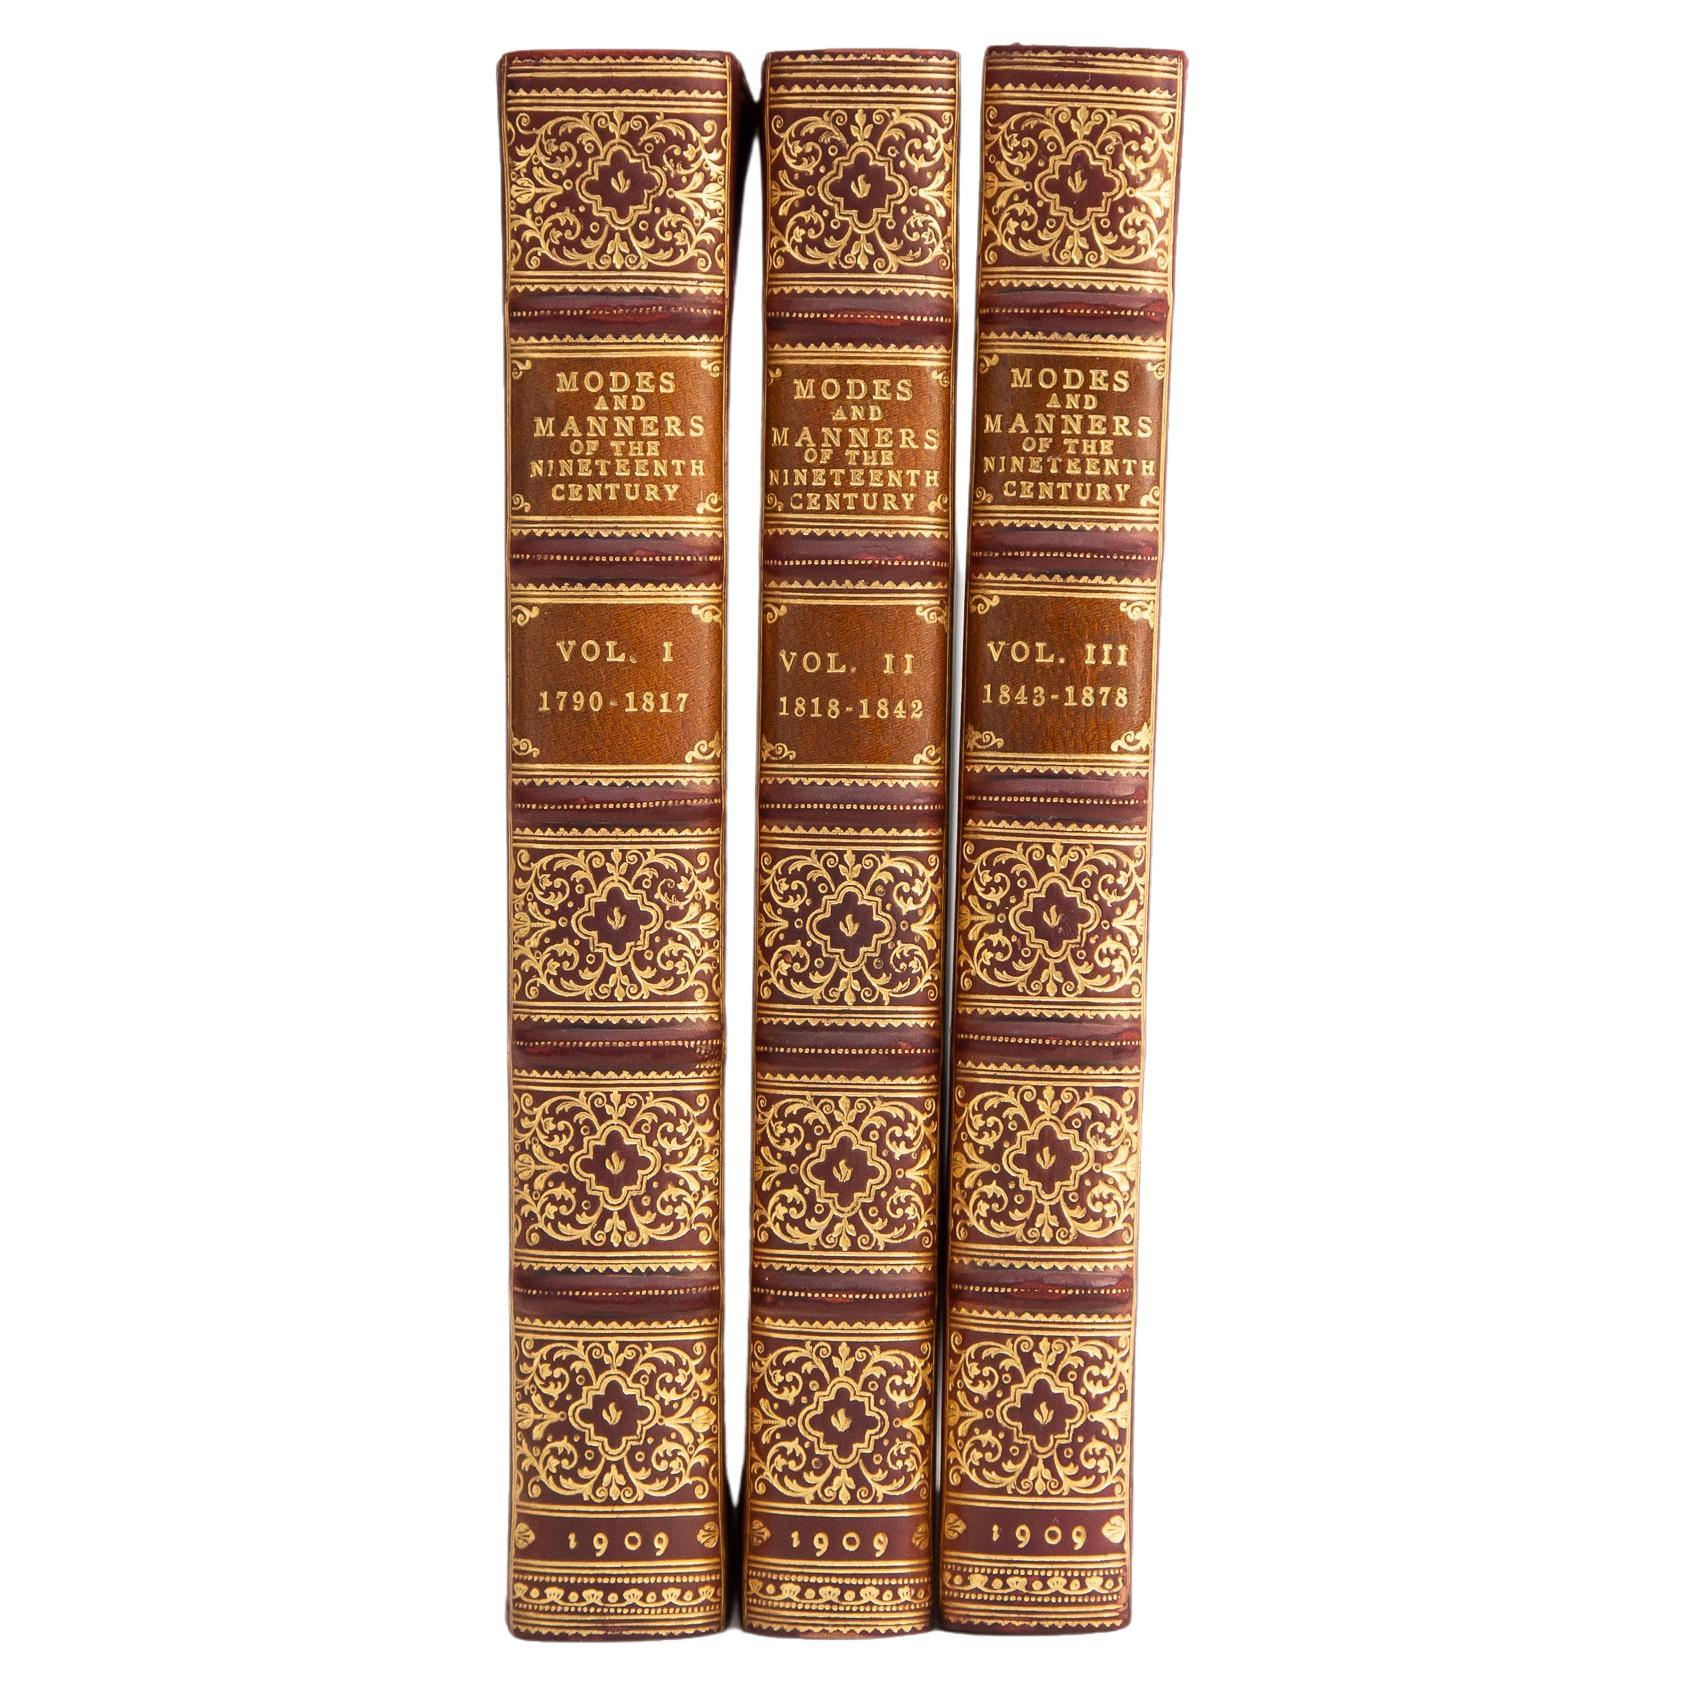 3 Volumes. Dr. Oskar Fischel & Max Boehn, Modes and Manners of the 19th Century